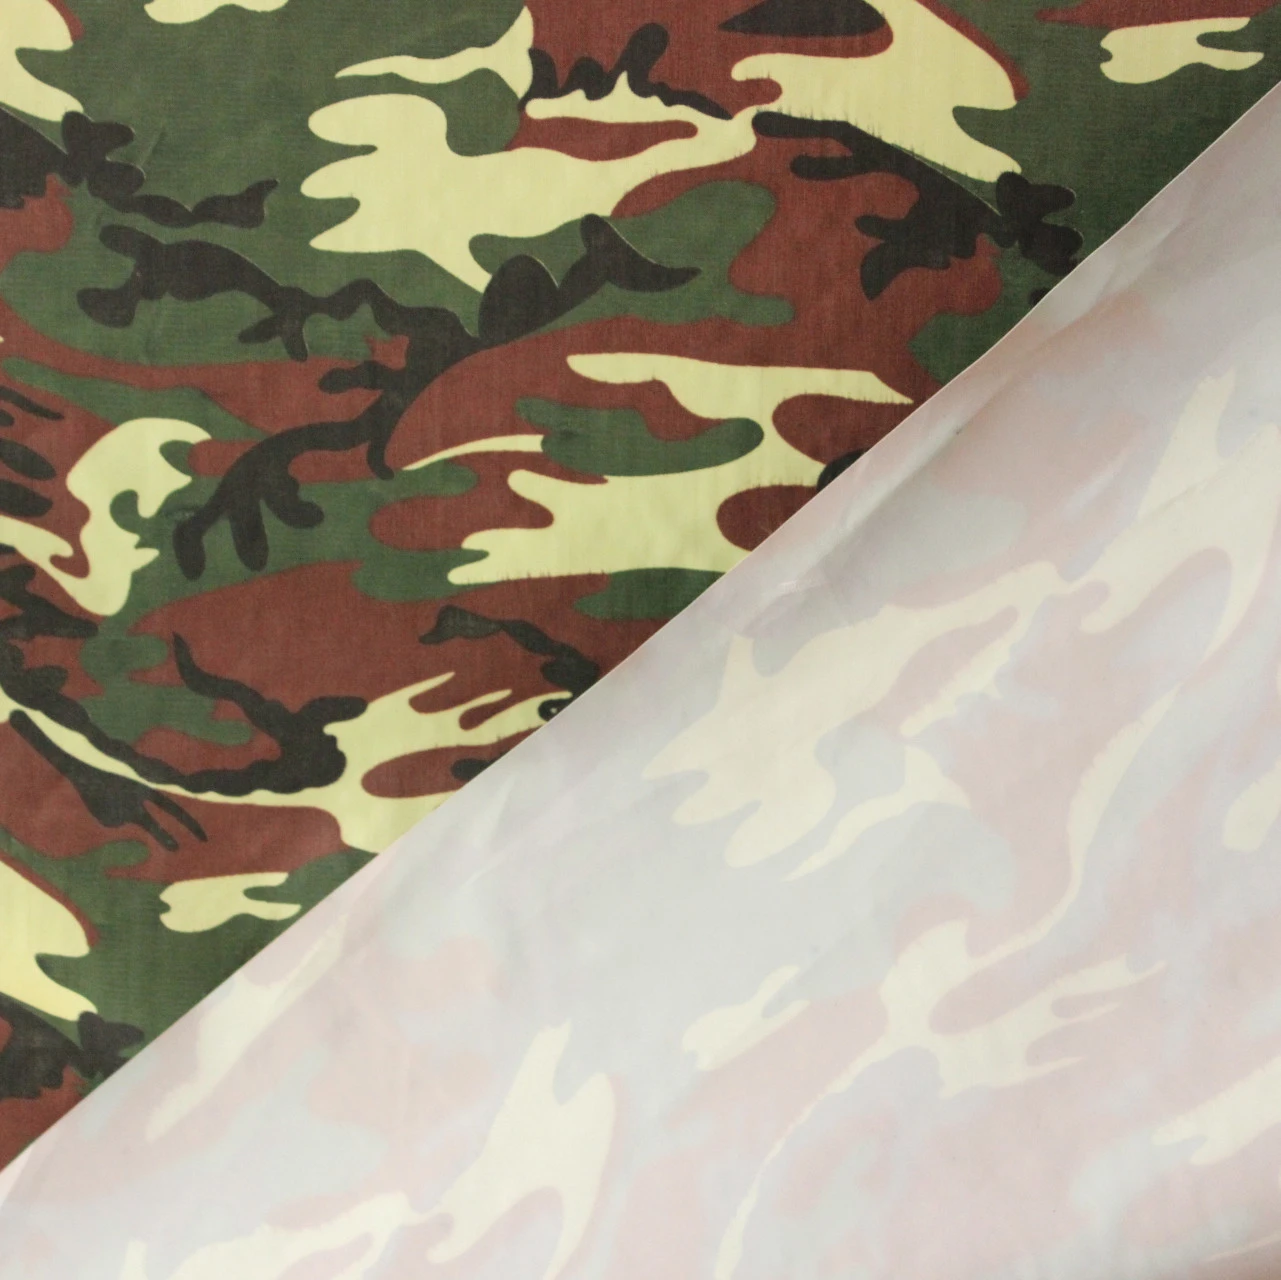 190t camouflage pattern oxford fabric bag material printed on